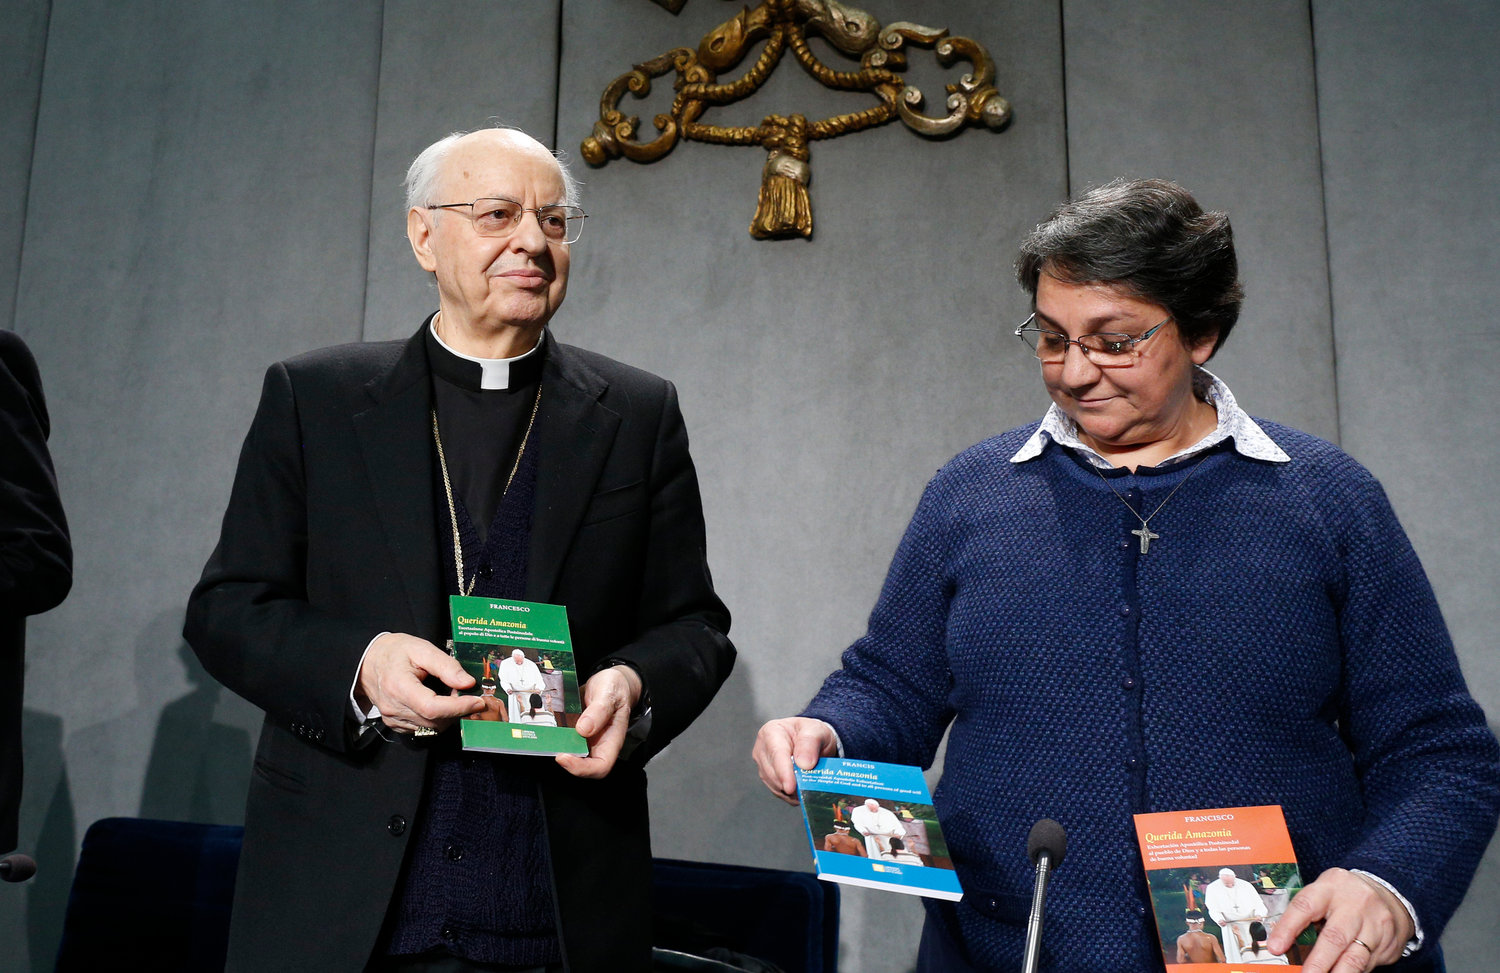 Cardinal Lorenzo Baldisseri, secretary-general of the Synod of Bishops, and Sister Augusta de Oliveira hold copies of Pope Francis’ apostolic exhortation, “Querida Amazonia” (Beloved Amazonia), during its release at a news conference at the Vatican Feb. 12, 2020. The document contains the Pope’s conclusions from the 2019 Synod of Bishops for the Amazon.